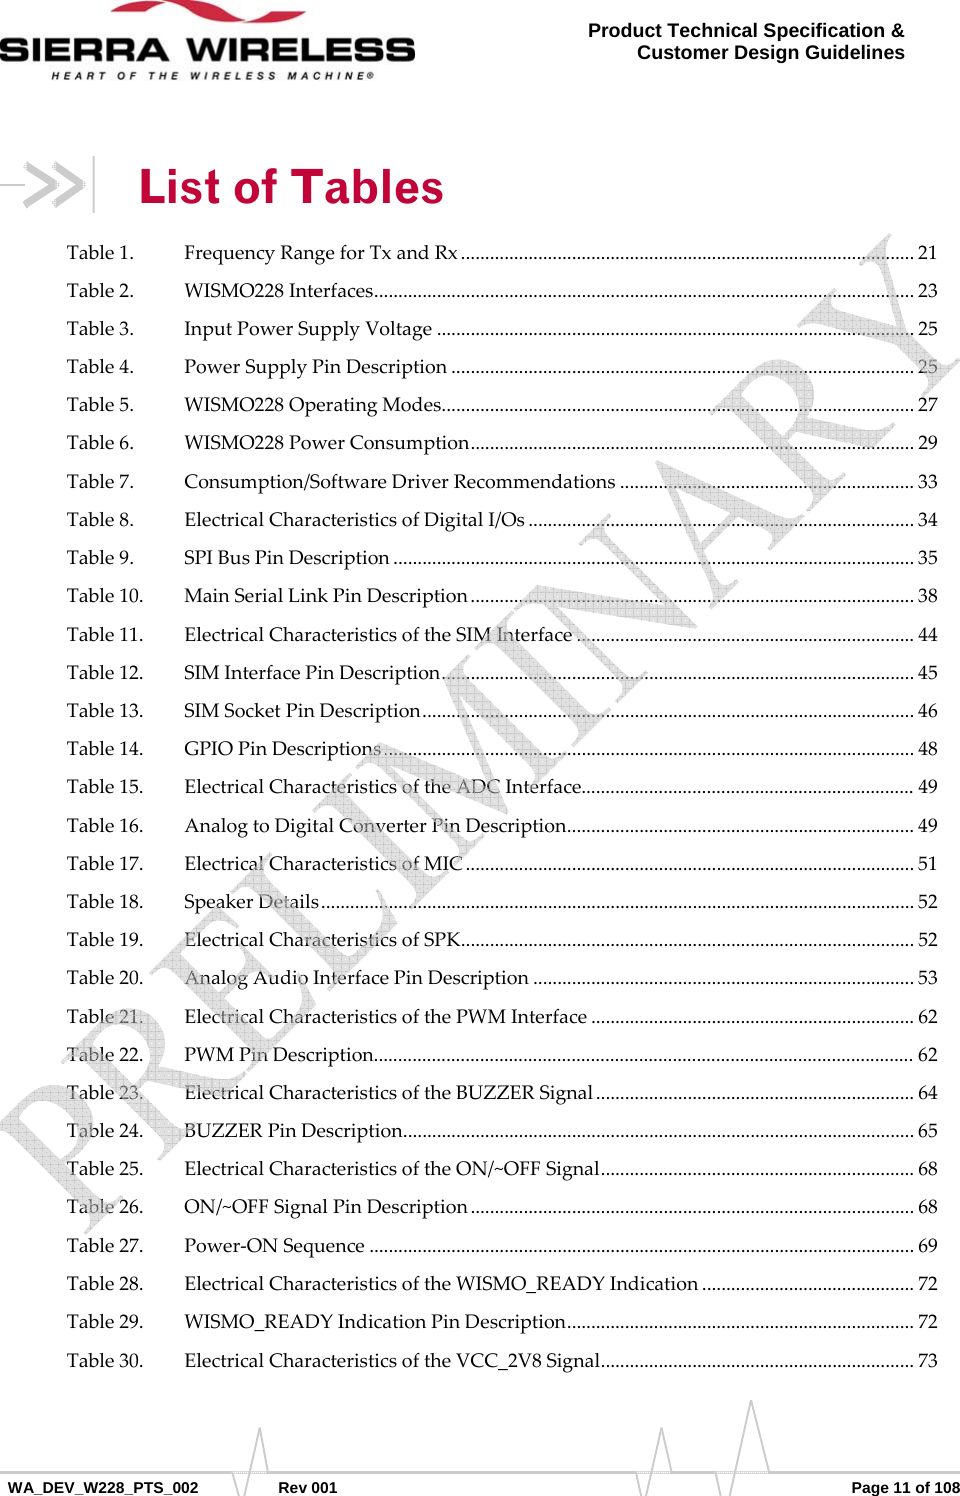      WA_DEV_W228_PTS_002 Rev 001  Page 11 of 108 Product Technical Specification &amp; Customer Design Guidelines List of Tables Table1. FrequencyRangeforTxandRx..............................................................................................21 Table2. WISMO228Interfaces................................................................................................................23 Table3. InputPowerSupplyVoltage...................................................................................................25 Table4. PowerSupplyPinDescription................................................................................................25 Table5. WISMO228OperatingModes..................................................................................................27 Table6. WISMO228PowerConsumption............................................................................................29 Table7. Consumption/SoftwareDriverRecommendations.............................................................33 Table8. ElectricalCharacteristicsofDigitalI/Os................................................................................34 Table9. SPIBusPinDescription............................................................................................................35 Table10. MainSerialLinkPinDescription............................................................................................38 Table11. ElectricalCharacteristicsoftheSIMInterface......................................................................44 Table12. SIMInterfacePinDescription..................................................................................................45 Table13. SIMSocketPinDescription......................................................................................................46 Table14. GPIOPinDescriptions..............................................................................................................48 Table15. ElectricalCharacteristicsoftheADCInterface.....................................................................49 Table16. AnalogtoDigitalConverterPinDescription........................................................................49 Table17. ElectricalCharacteristicsofMIC.............................................................................................51 Table18. SpeakerDetails...........................................................................................................................52 Table19. ElectricalCharacteristicsofSPK..............................................................................................52 Table20. AnalogAudioInterfacePinDescription...............................................................................53 Table21. ElectricalCharacteristicsofthePWMInterface...................................................................62 Table22. PWMPinDescription................................................................................................................62 Table23. ElectricalCharacteristicsoftheBUZZERSignal..................................................................64 Table24. BUZZERPinDescription..........................................................................................................65 Table25. ElectricalCharacteristicsoftheON/~OFFSignal.................................................................68 Table26. ON/~OFFSignalPinDescription............................................................................................68 Table27. Power‐ONSequence.................................................................................................................69 Table28. ElectricalCharacteristicsoftheWISMO_READYIndication............................................72 Table29. WISMO_READYIndicationPinDescription........................................................................72 Table30. ElectricalCharacteristicsoftheVCC_2V8Signal.................................................................73    